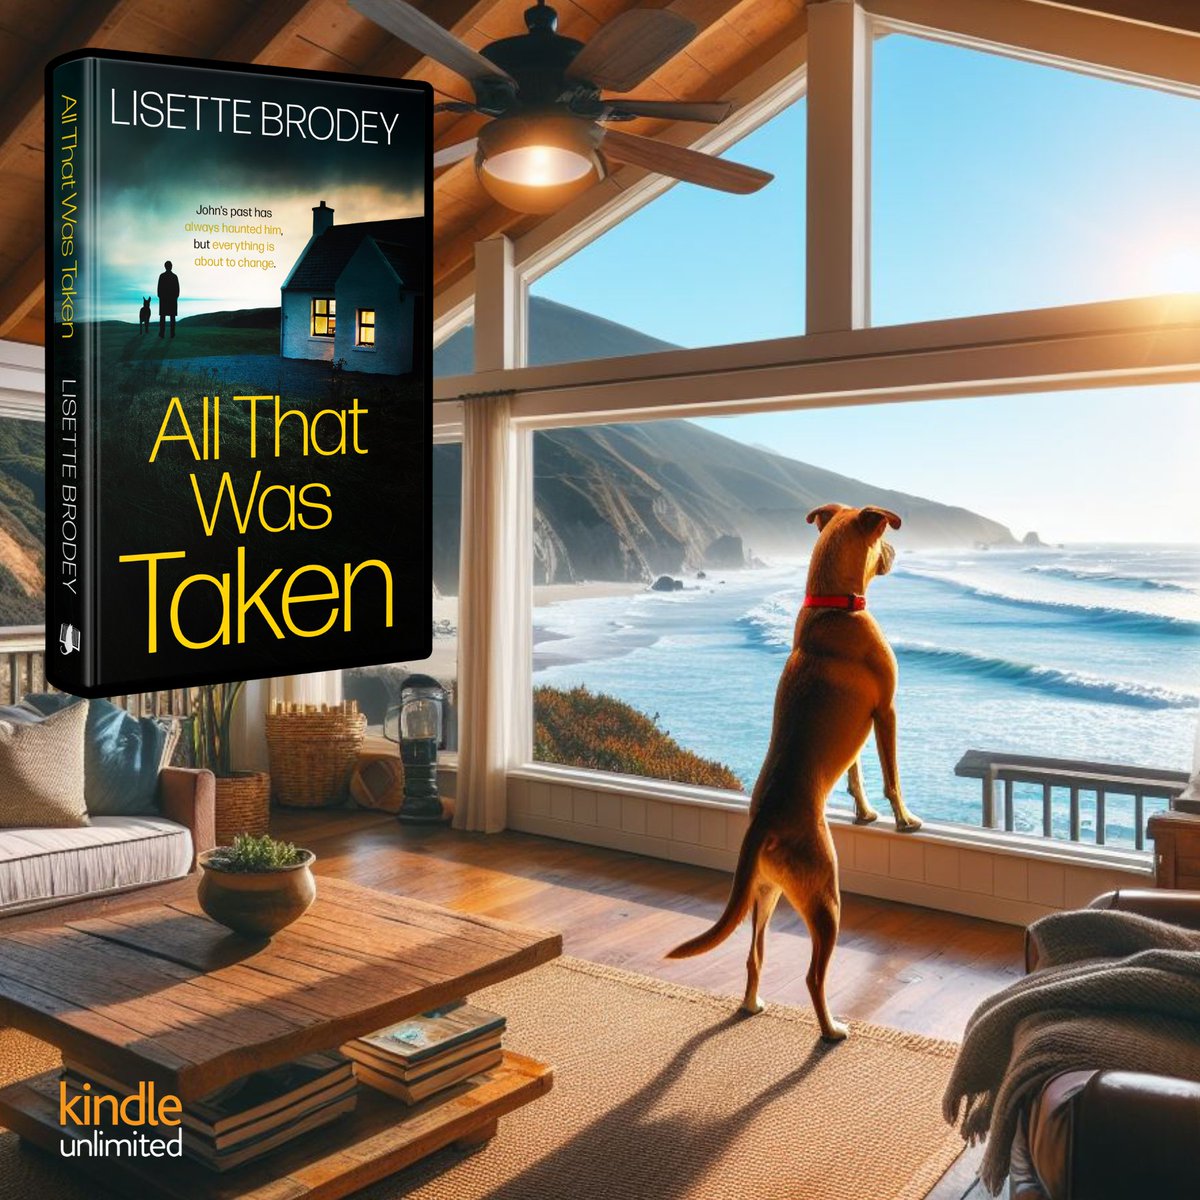 ALL THAT WAS TAKEN ✨ 'As tensions escalate and the enemy comes into focus, John and Sunny know they face grave danger from people with no conscience. Yet, they have no idea what diabolical plans lie in wait for them.' mybook.to/ATWTaken 📘 #FREE on #KU 🌊🌔🐕